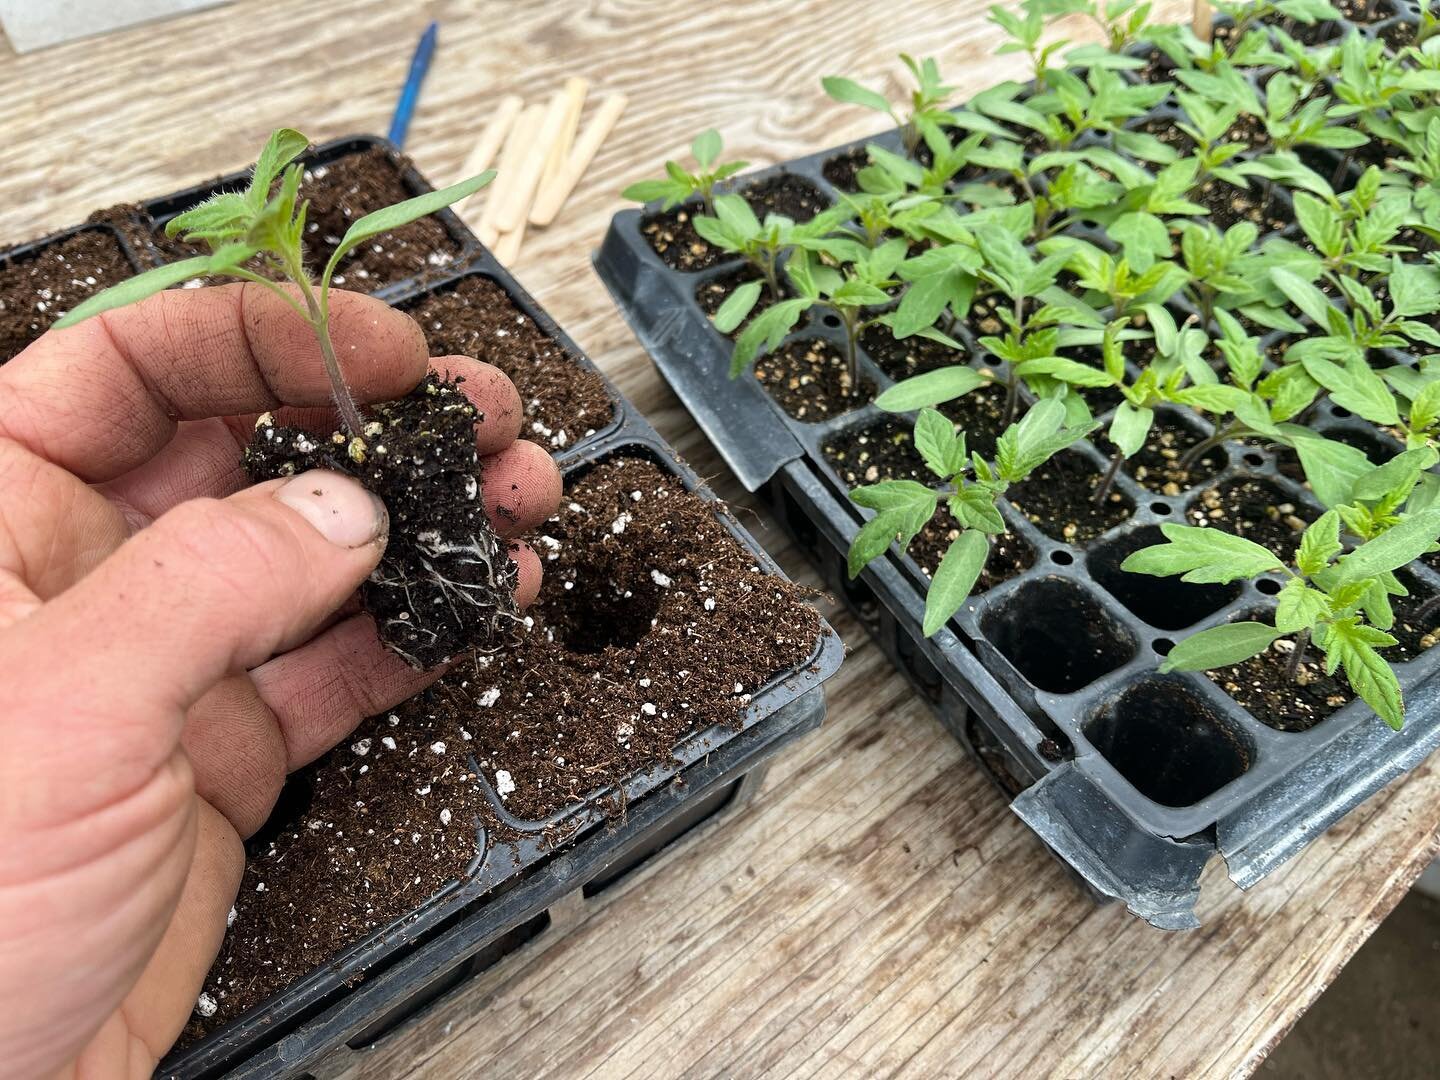 Potting up tomatoes destined for our hightunnel.  These are the earliest tomatoes we seed and we do so into 98 cell flats that can be placed on bottom heat for germination in the greenhouse.  After a few weeks they get moved to these 18 cell flats wh